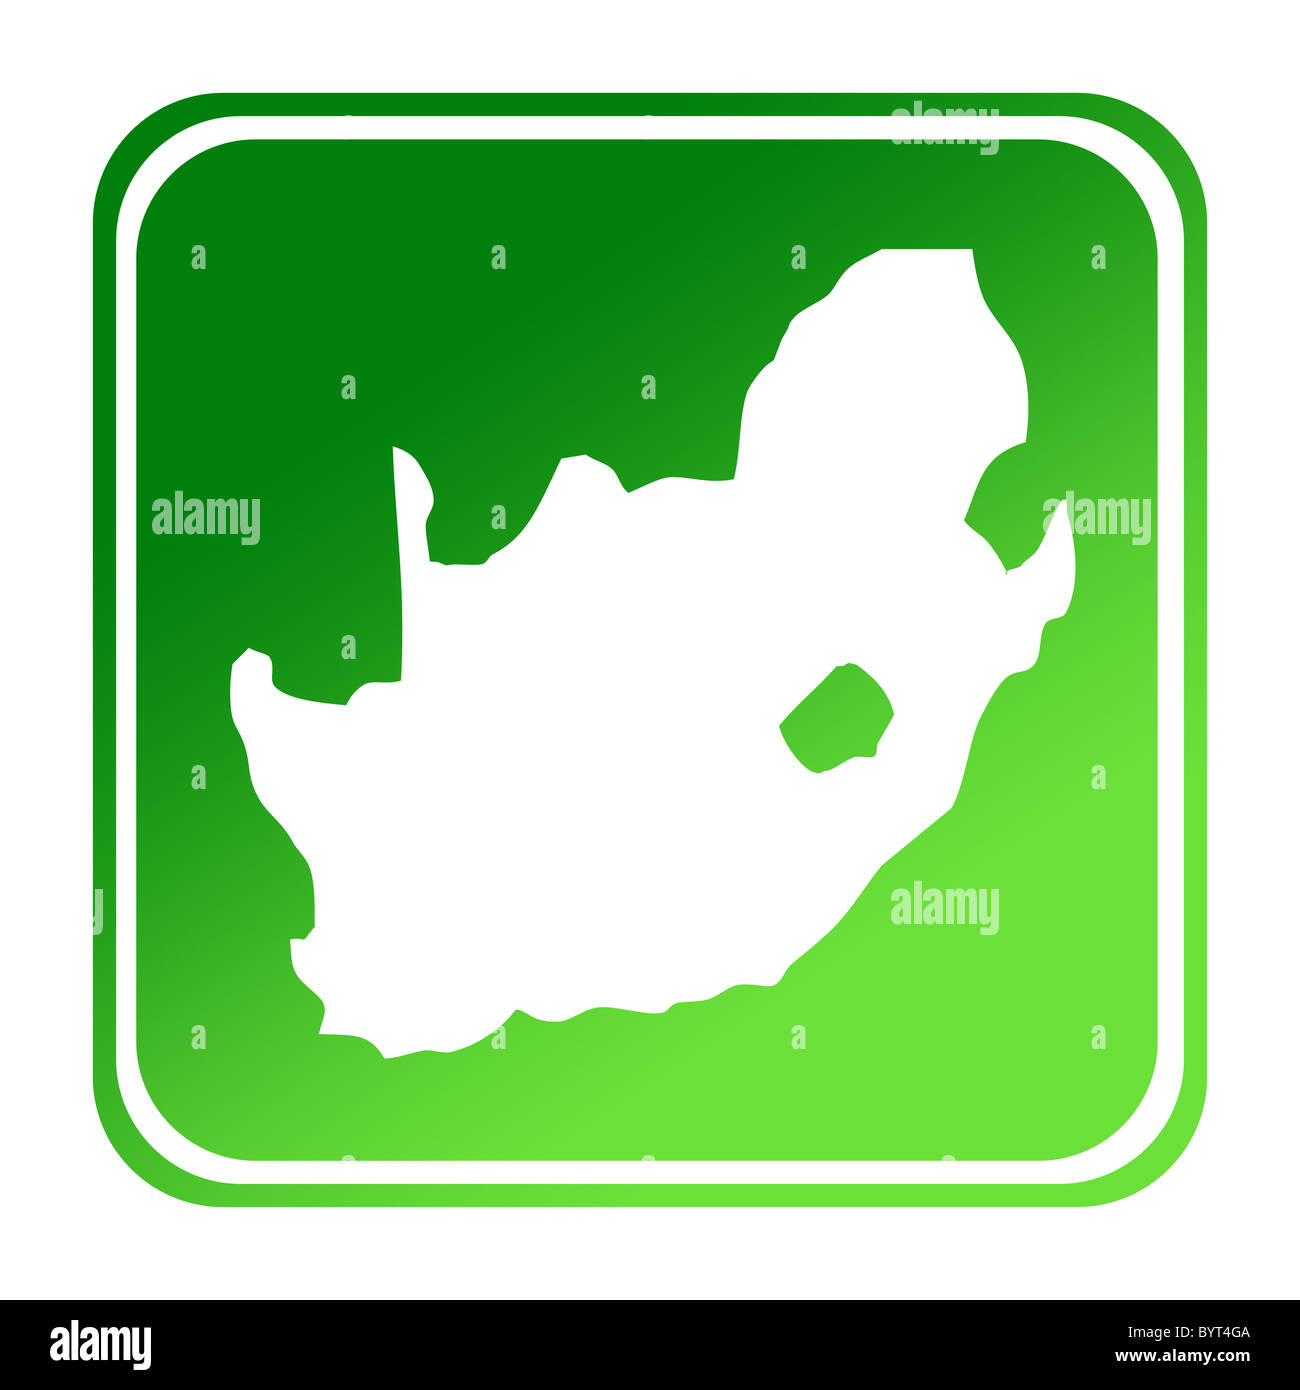 South Africa map button in gradient green; isolated on white background with clipping path. Stock Photo